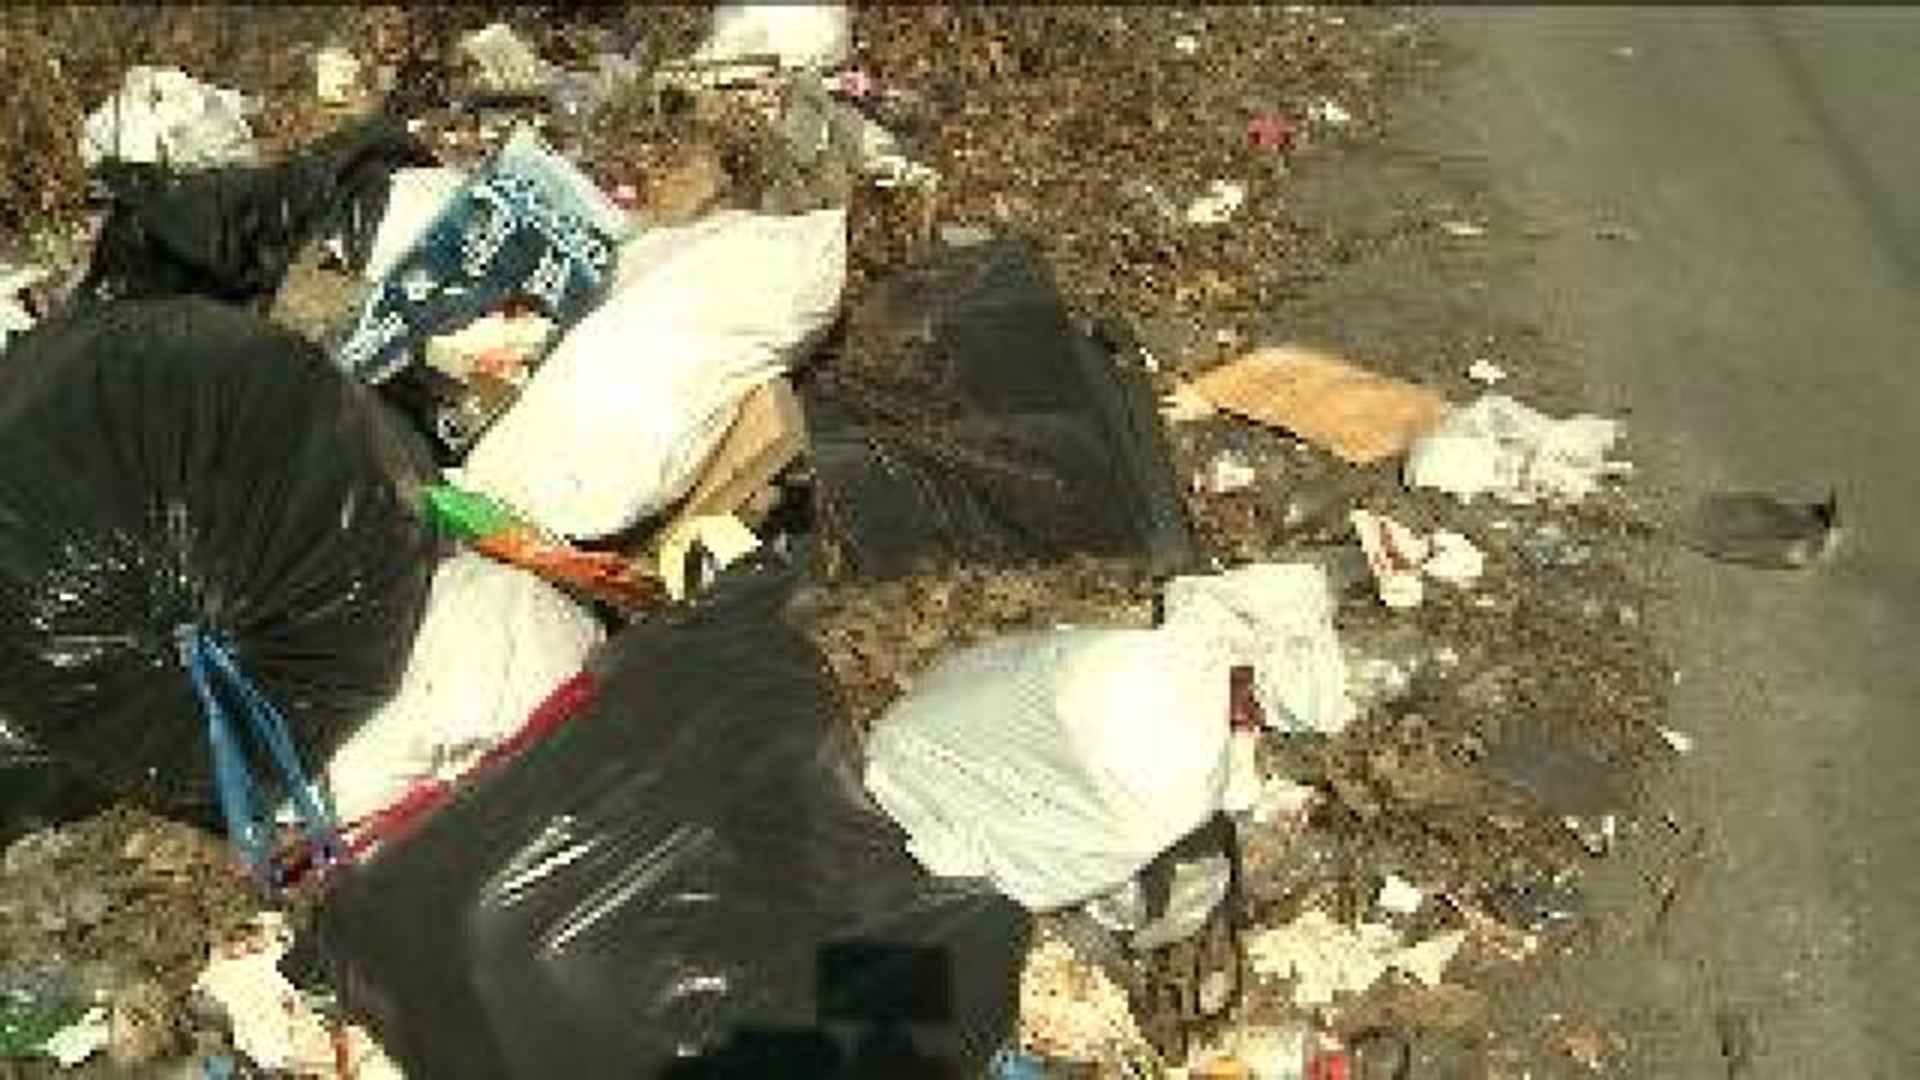 St. Patrick’s Party Lingers in Litter